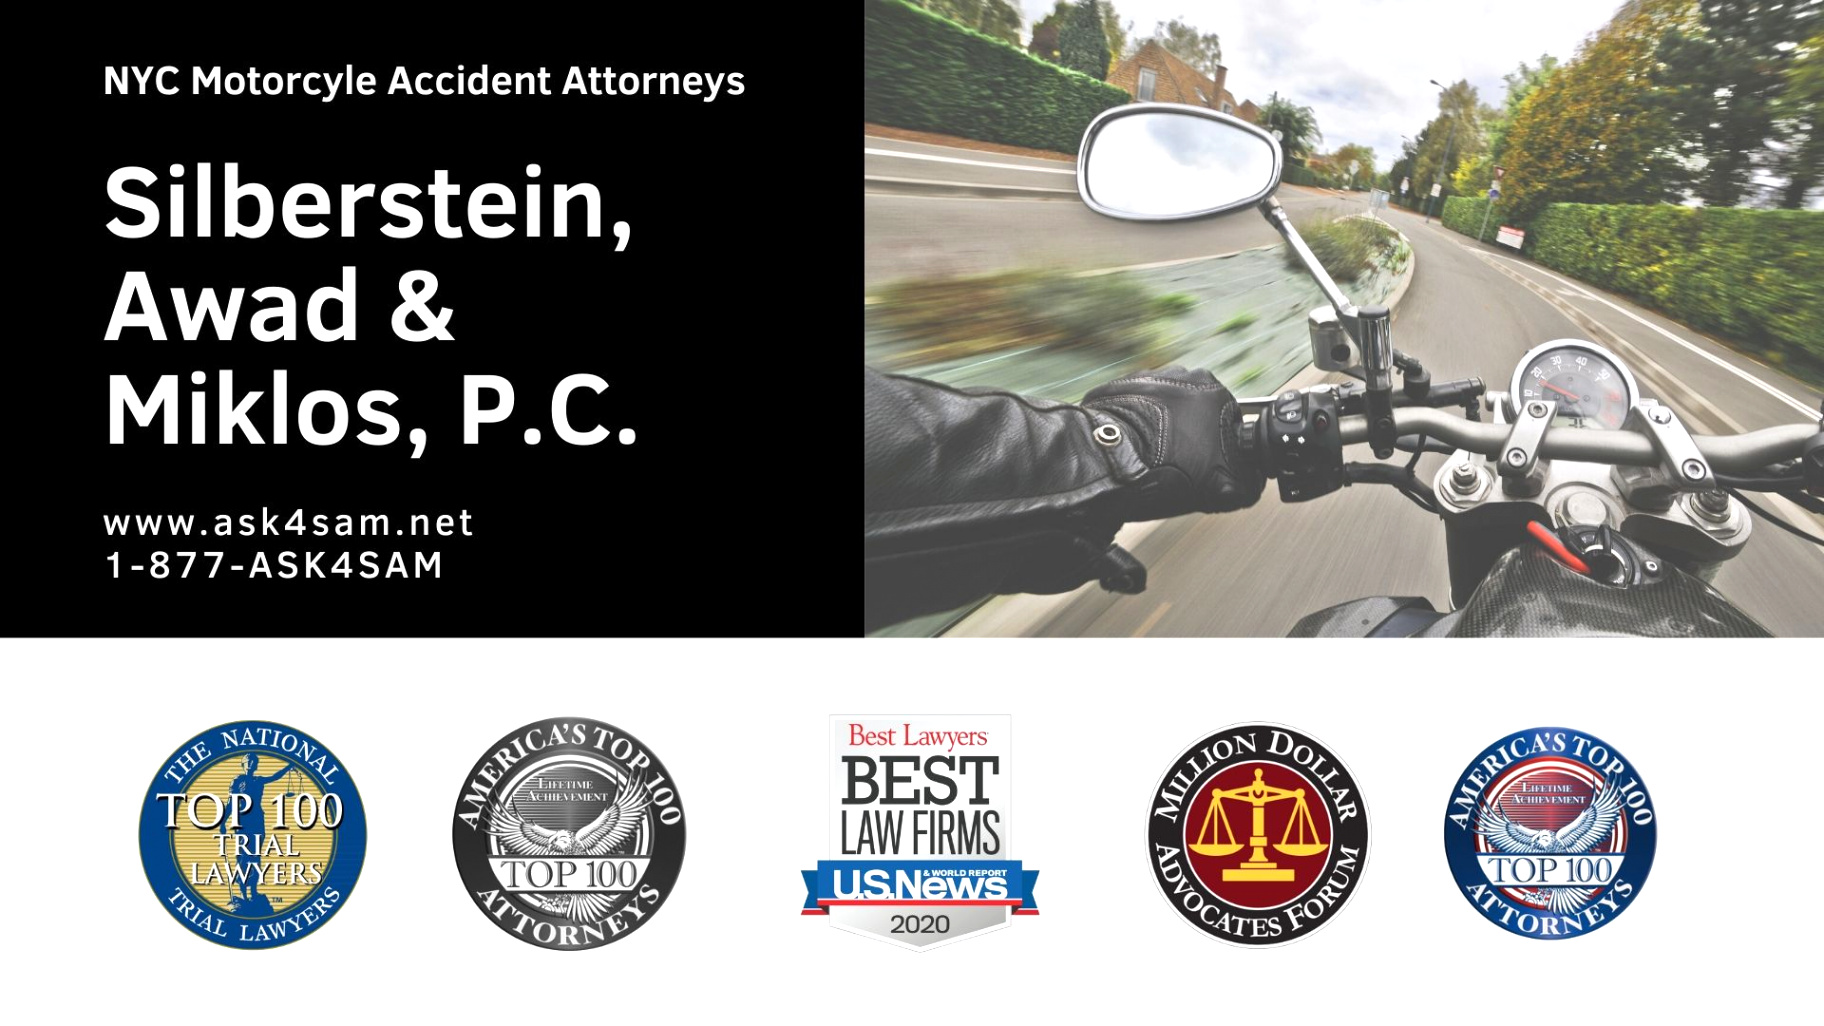 Auto Accident Lawyer Brooklyn Dans Motorcyclist In Critical Condition From Suv Collision In Manhattan